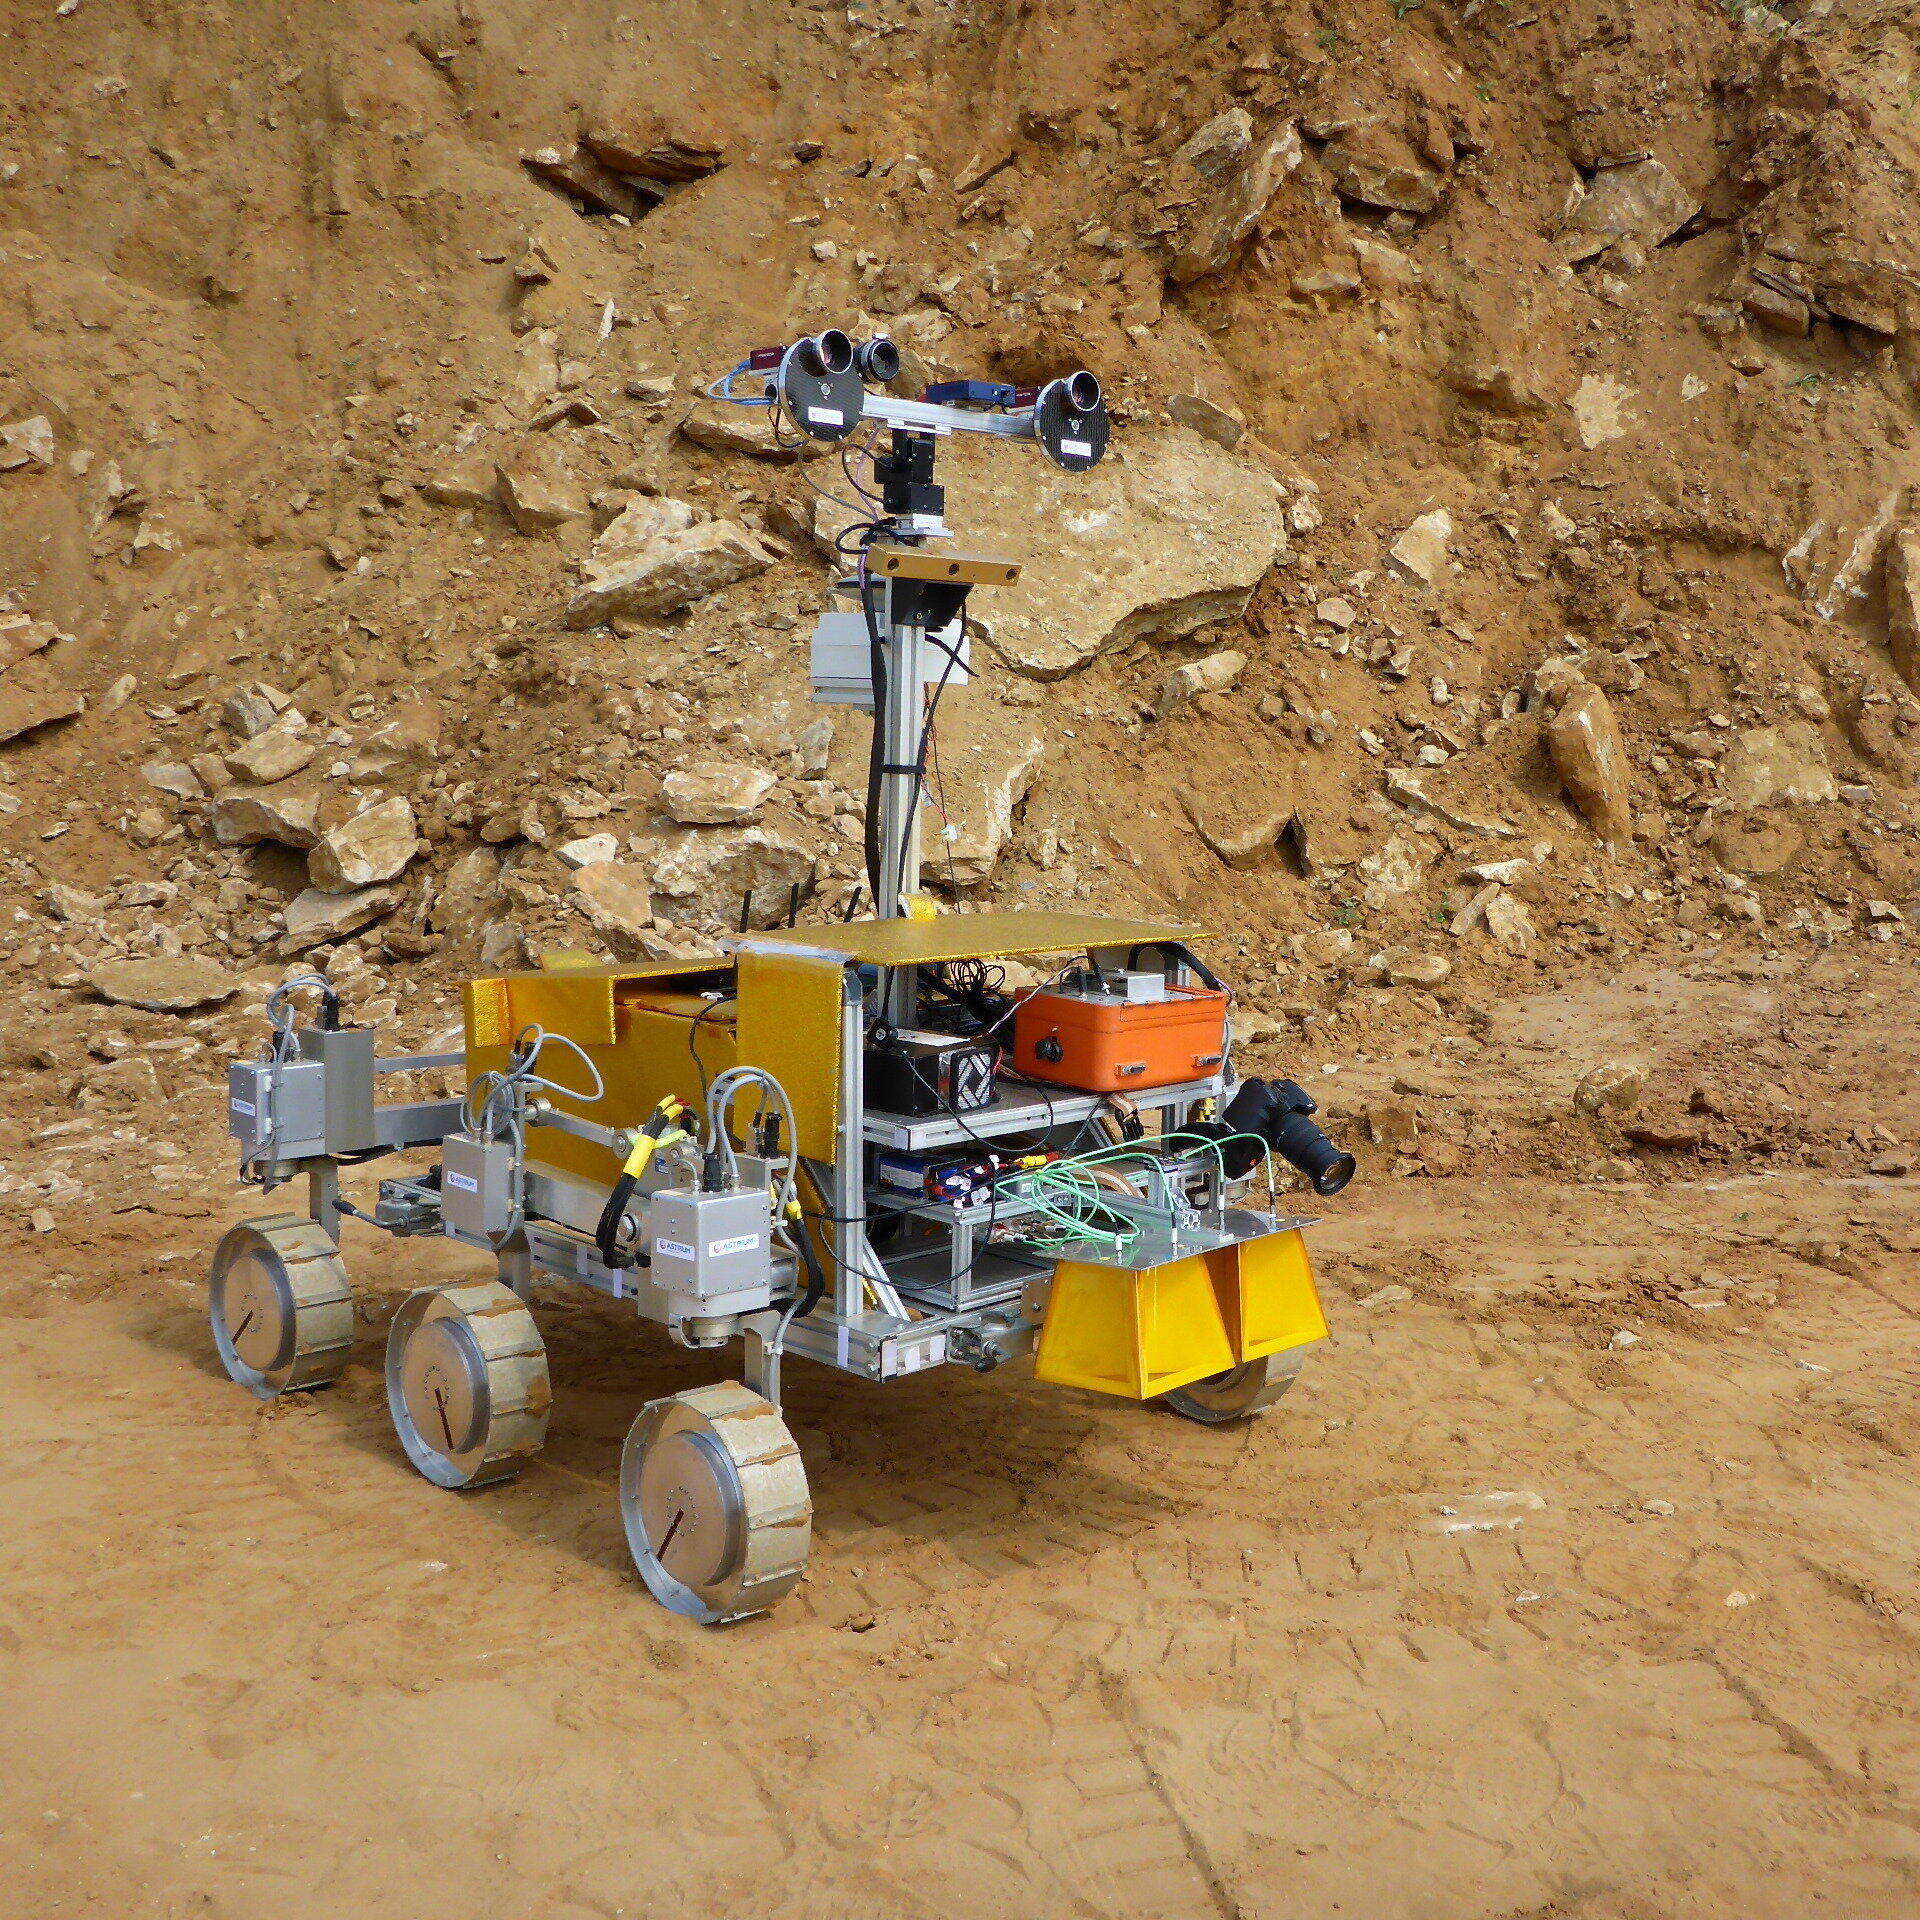 Rover test